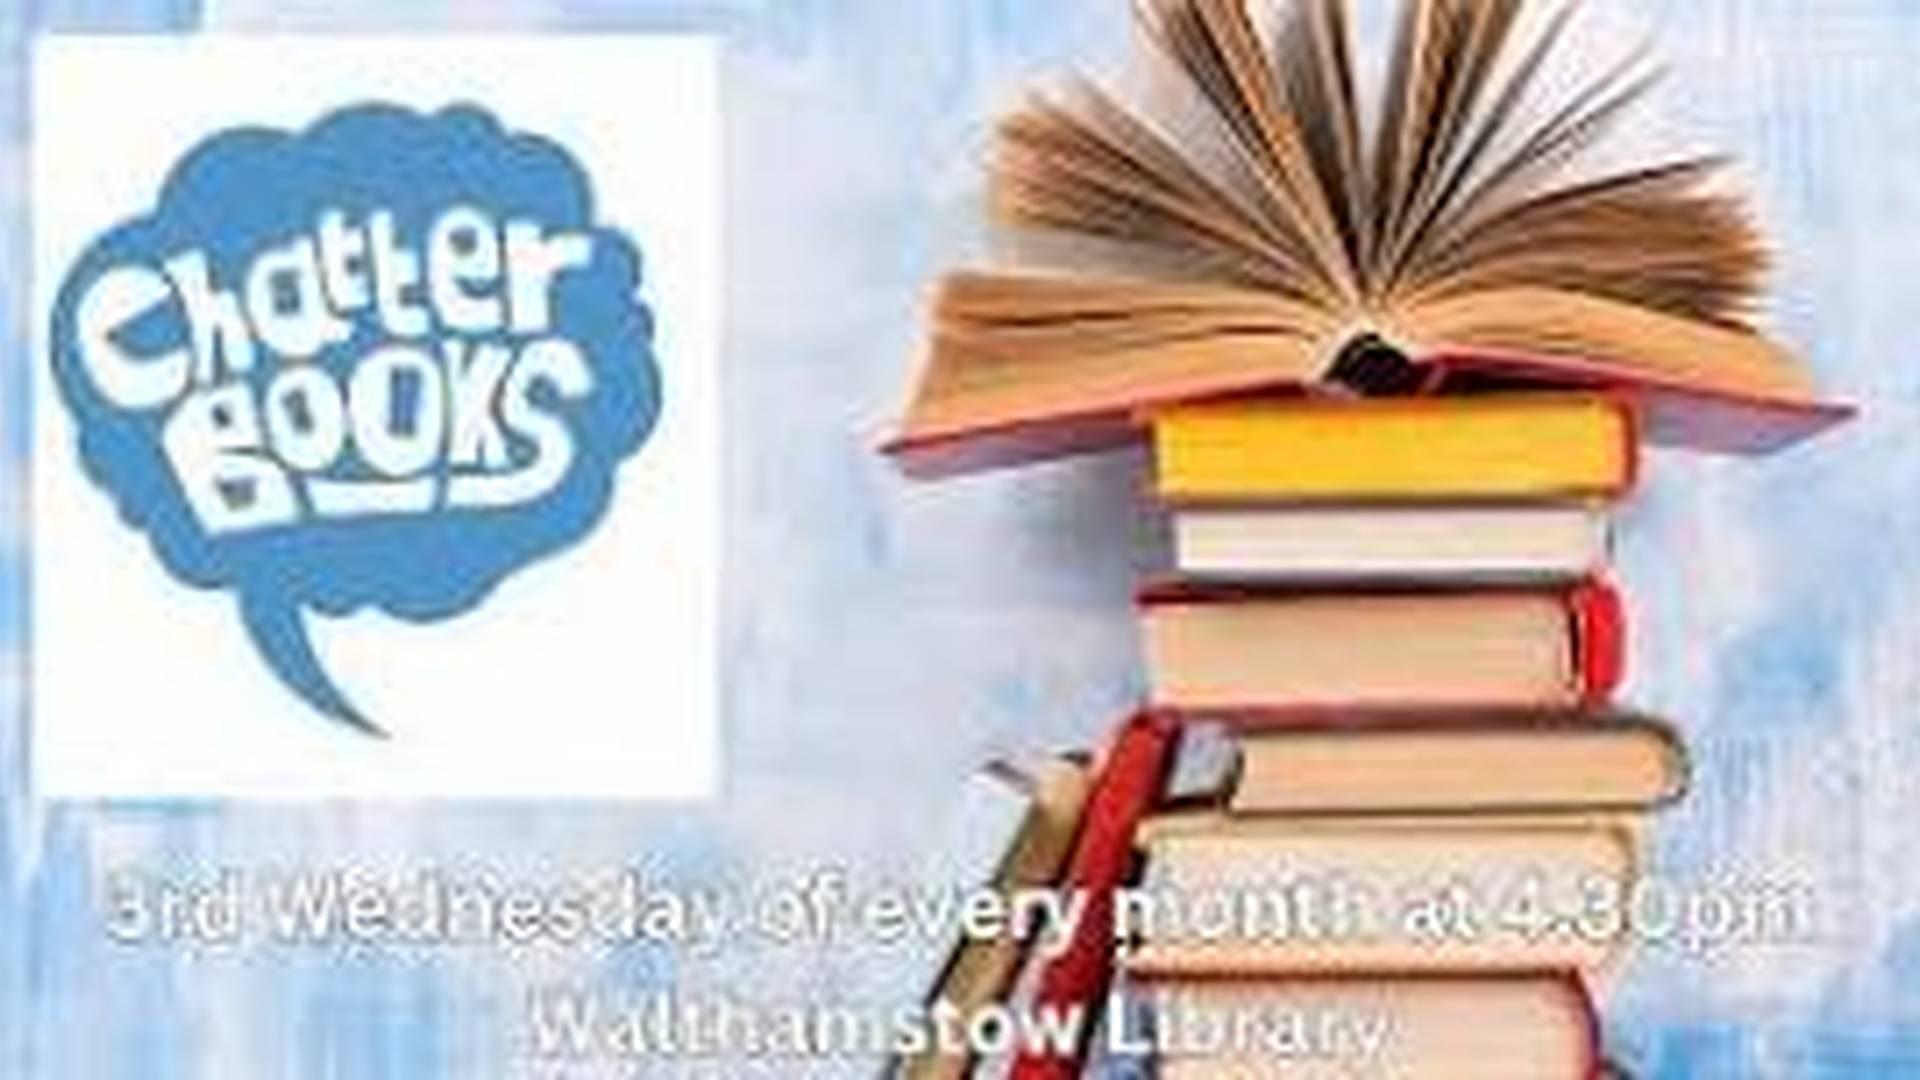 Chatterbooks - Reading club for children photo